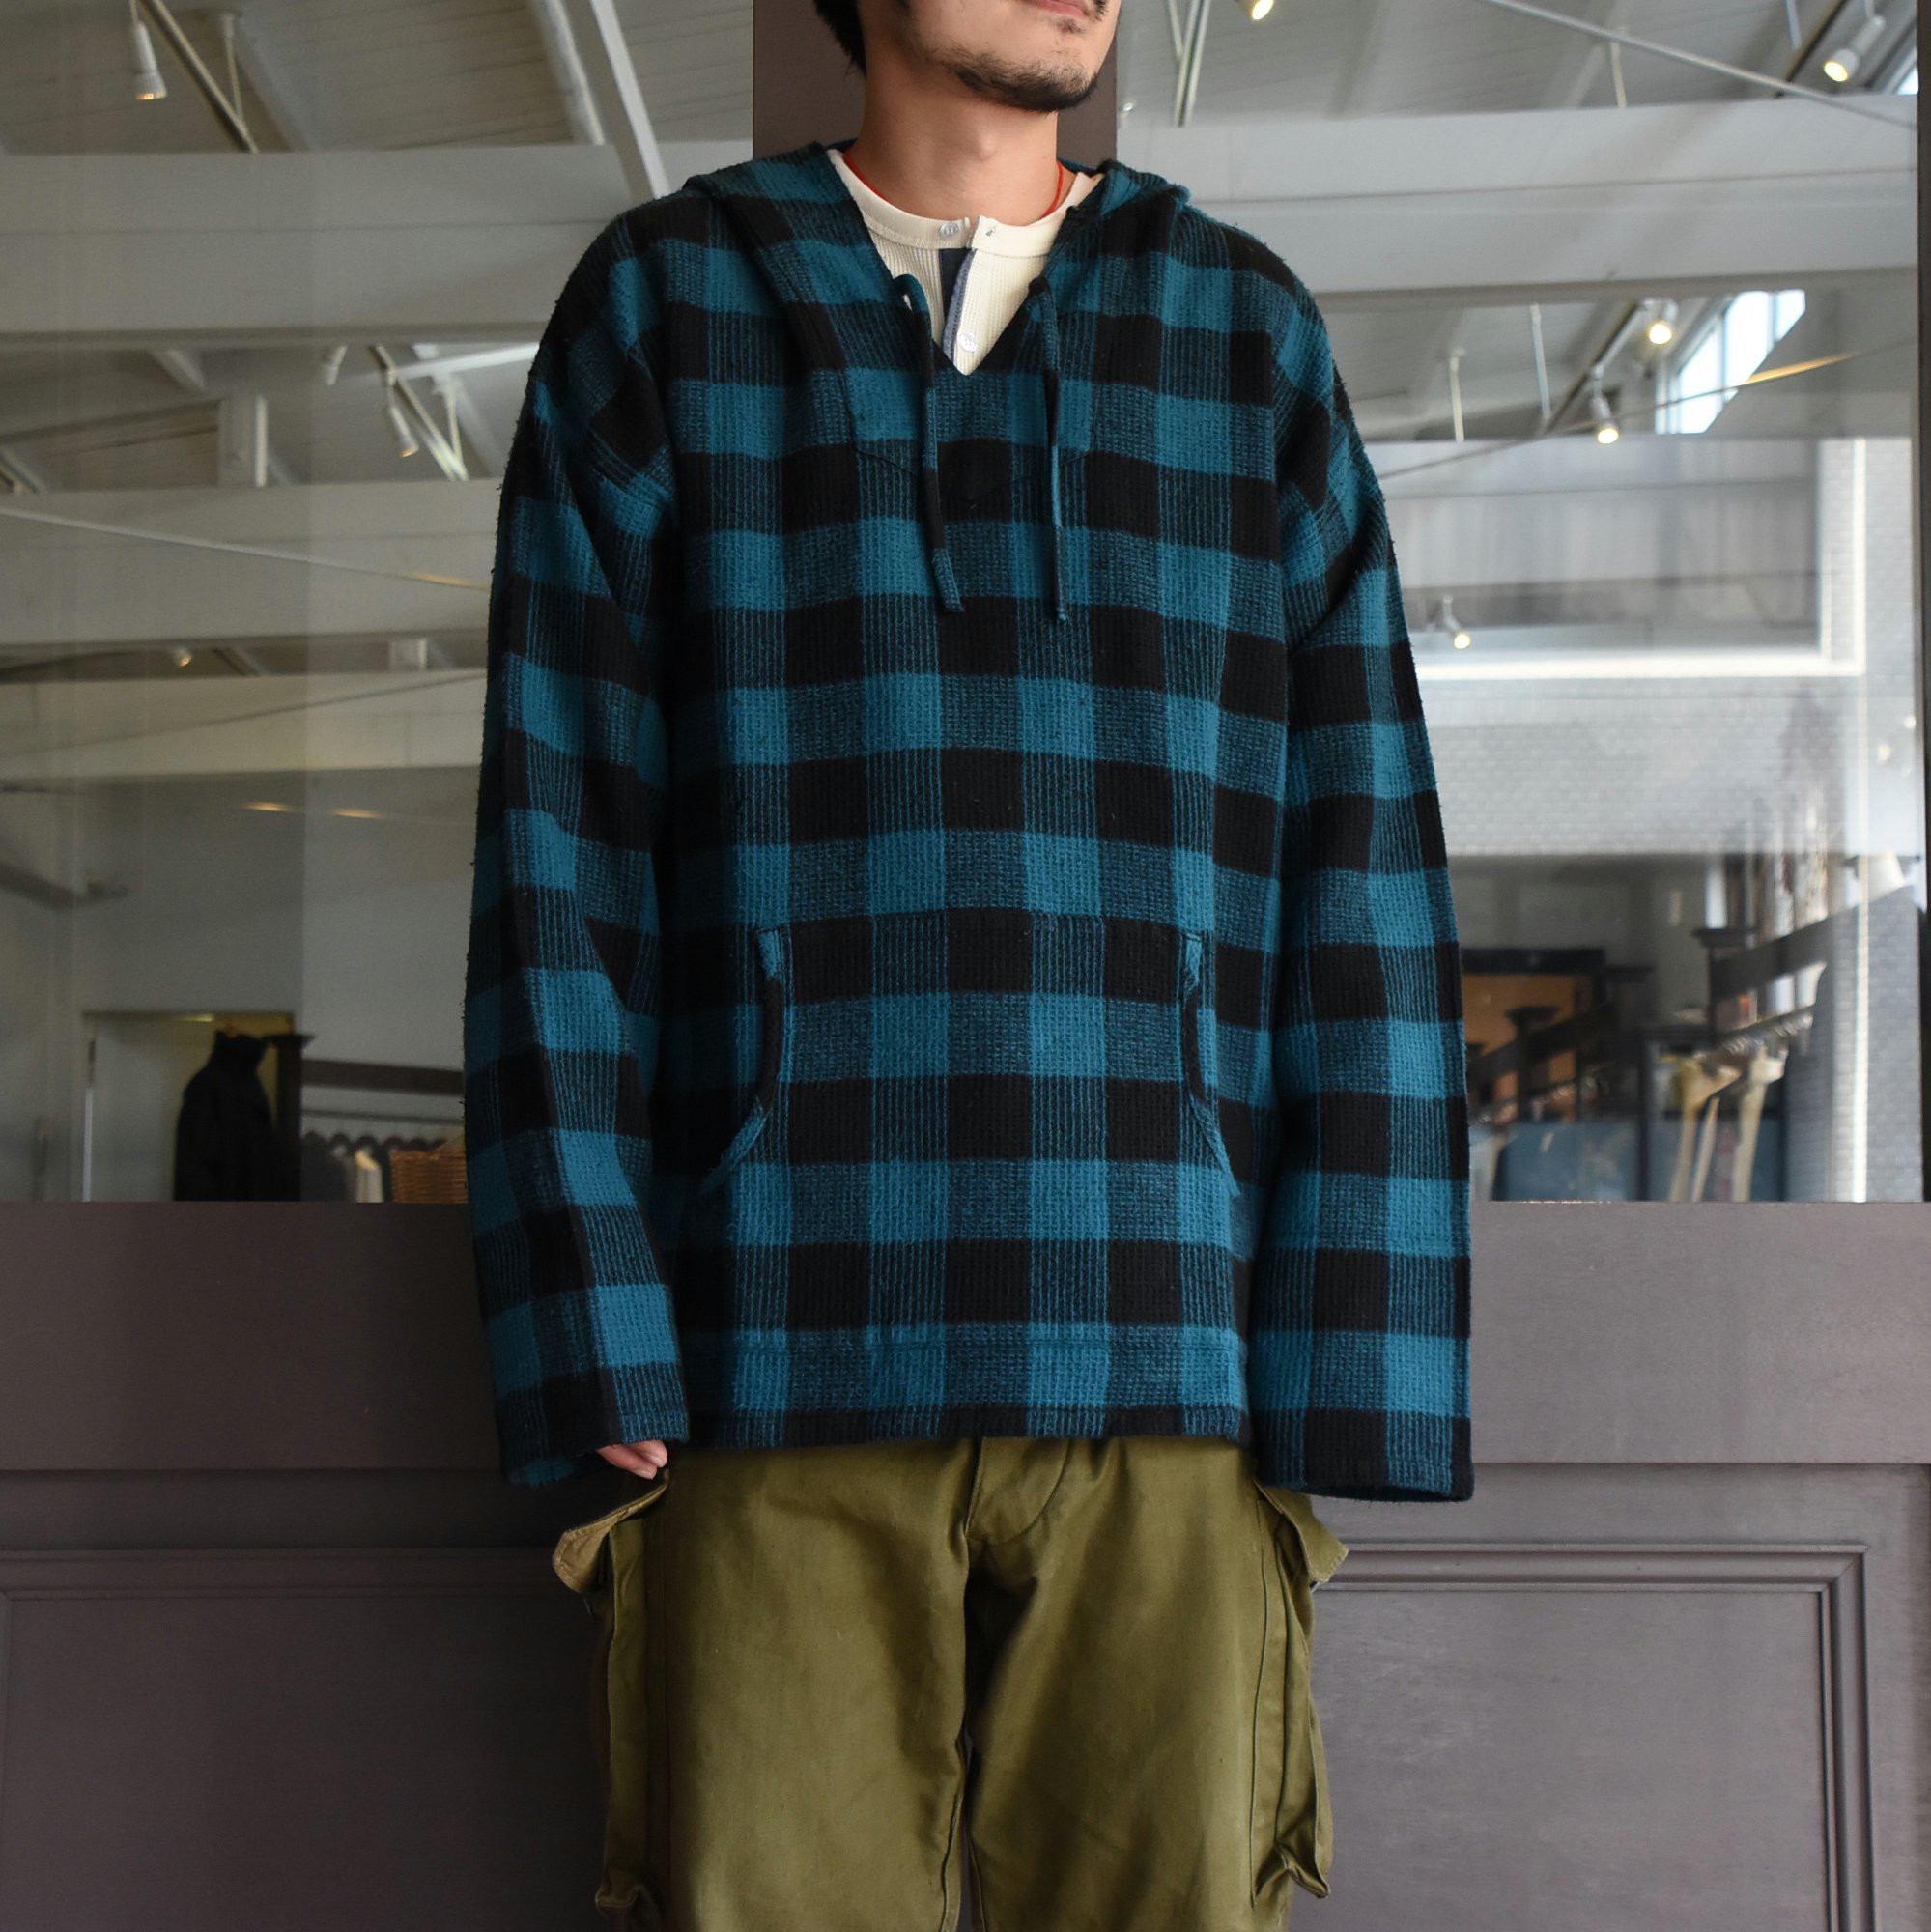 40% off sale】South2 West8(サウスツーウエストエイト) Mexican Parka